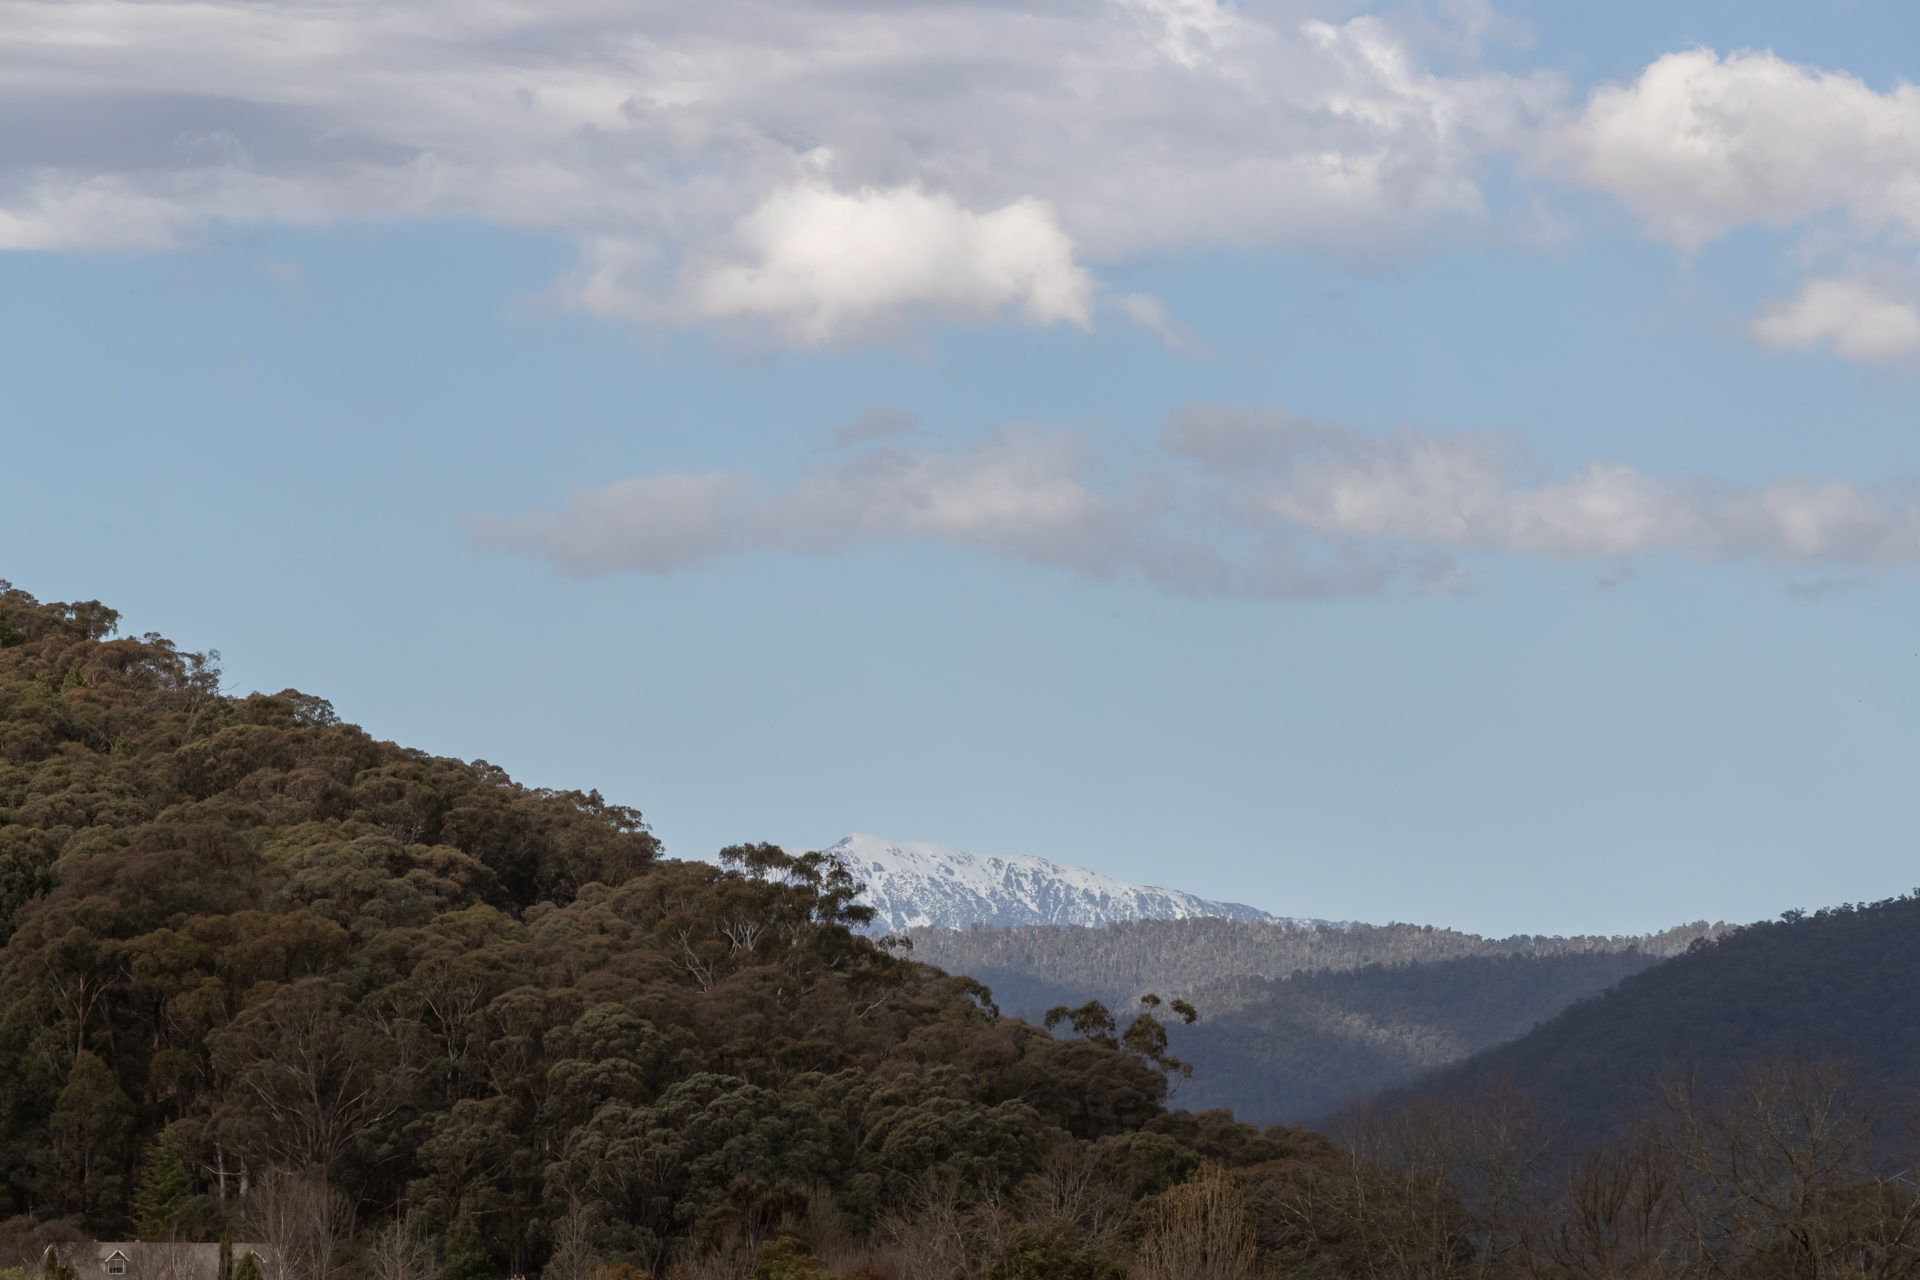 Balcony to Bogong – modern house ten minute stroll to town